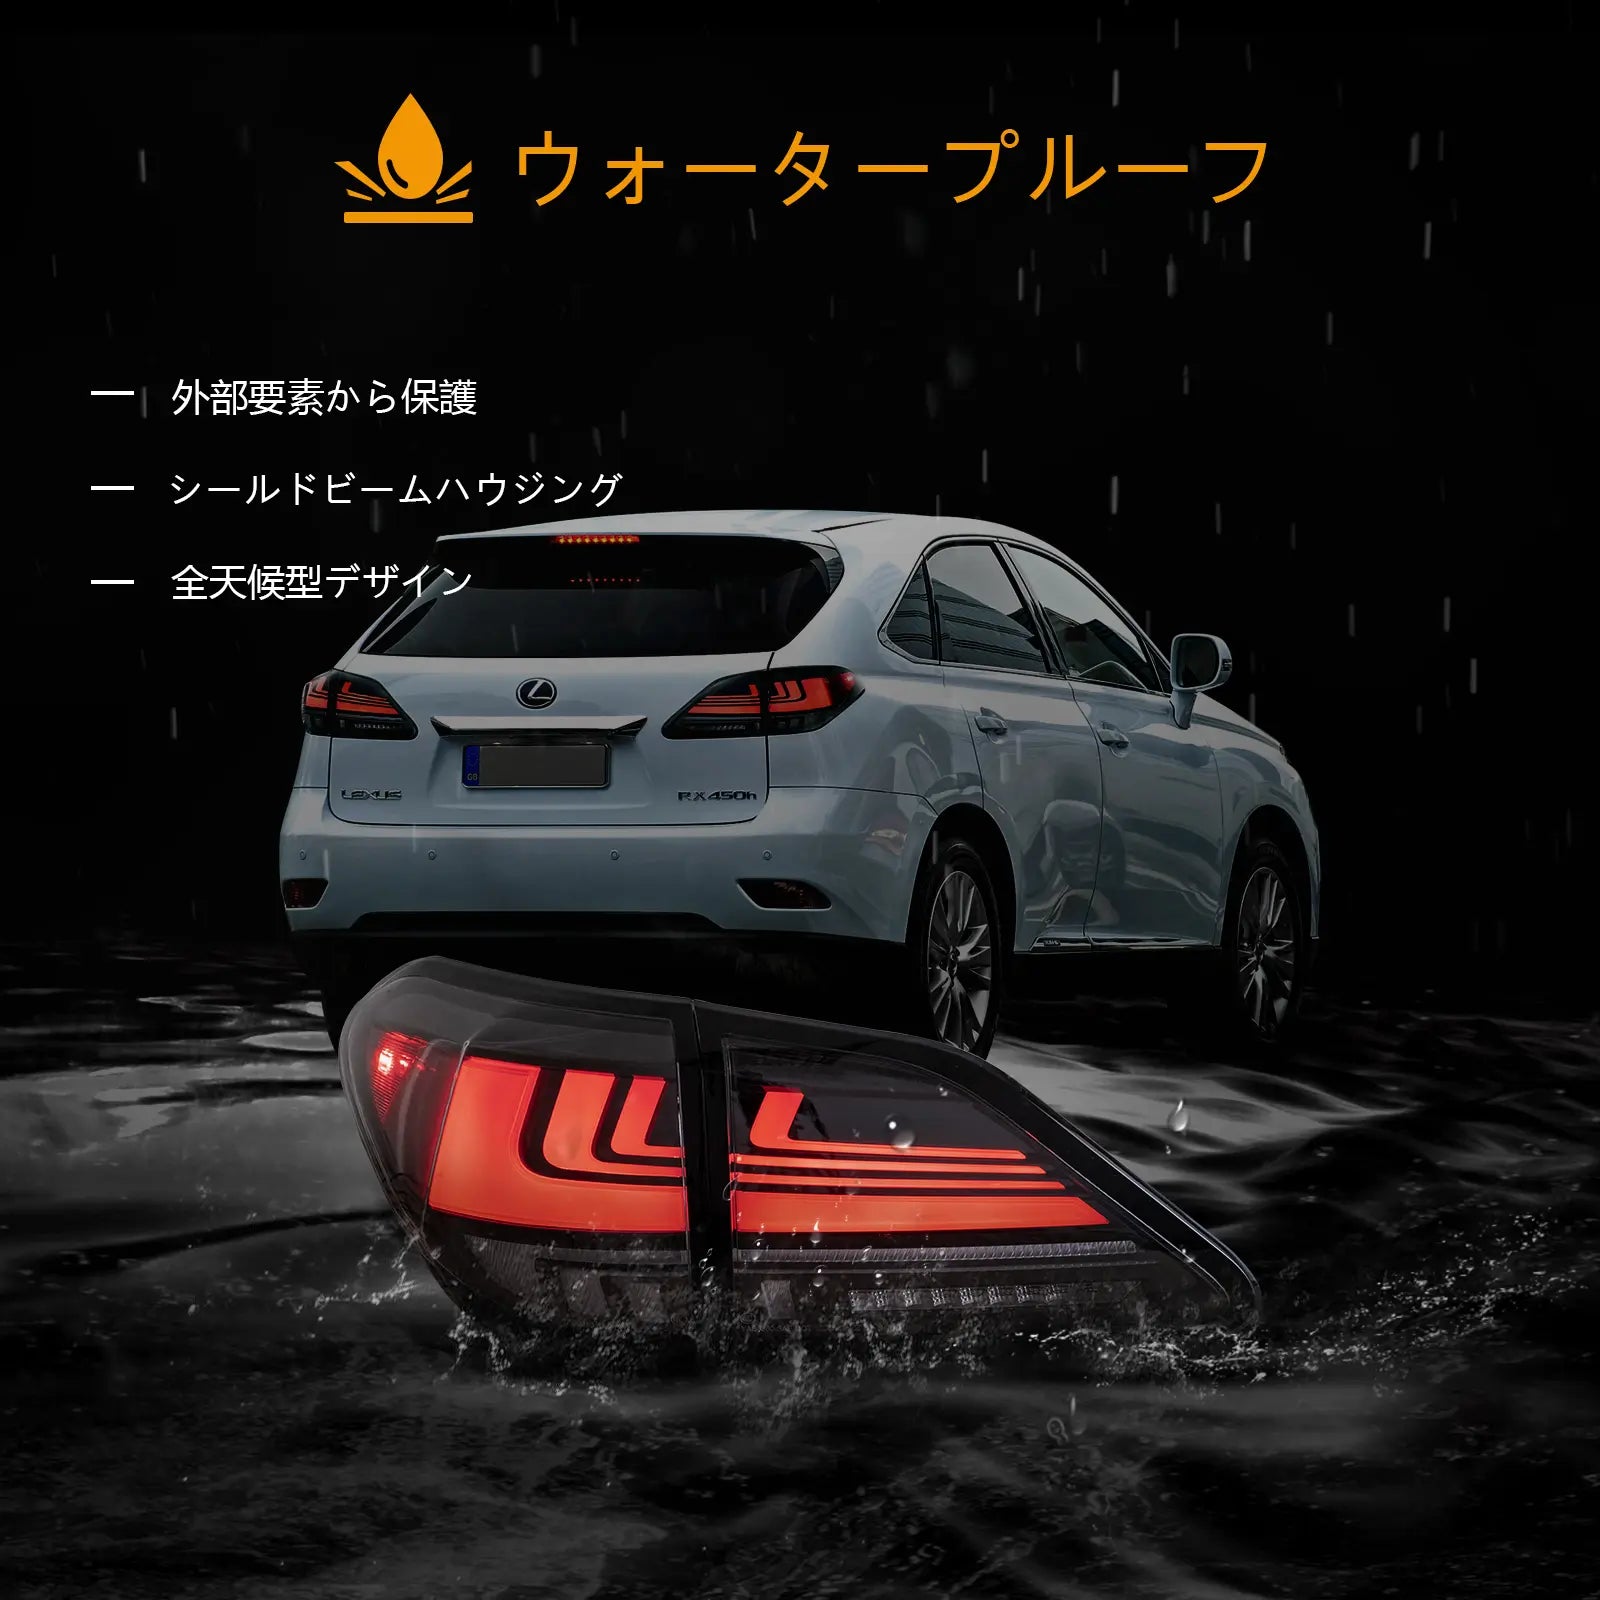 09-14 Lexus RX Series 3th Gen (AL10) (Japan Built) Vland LED Tail Light with Dynamic Welcome Lighting